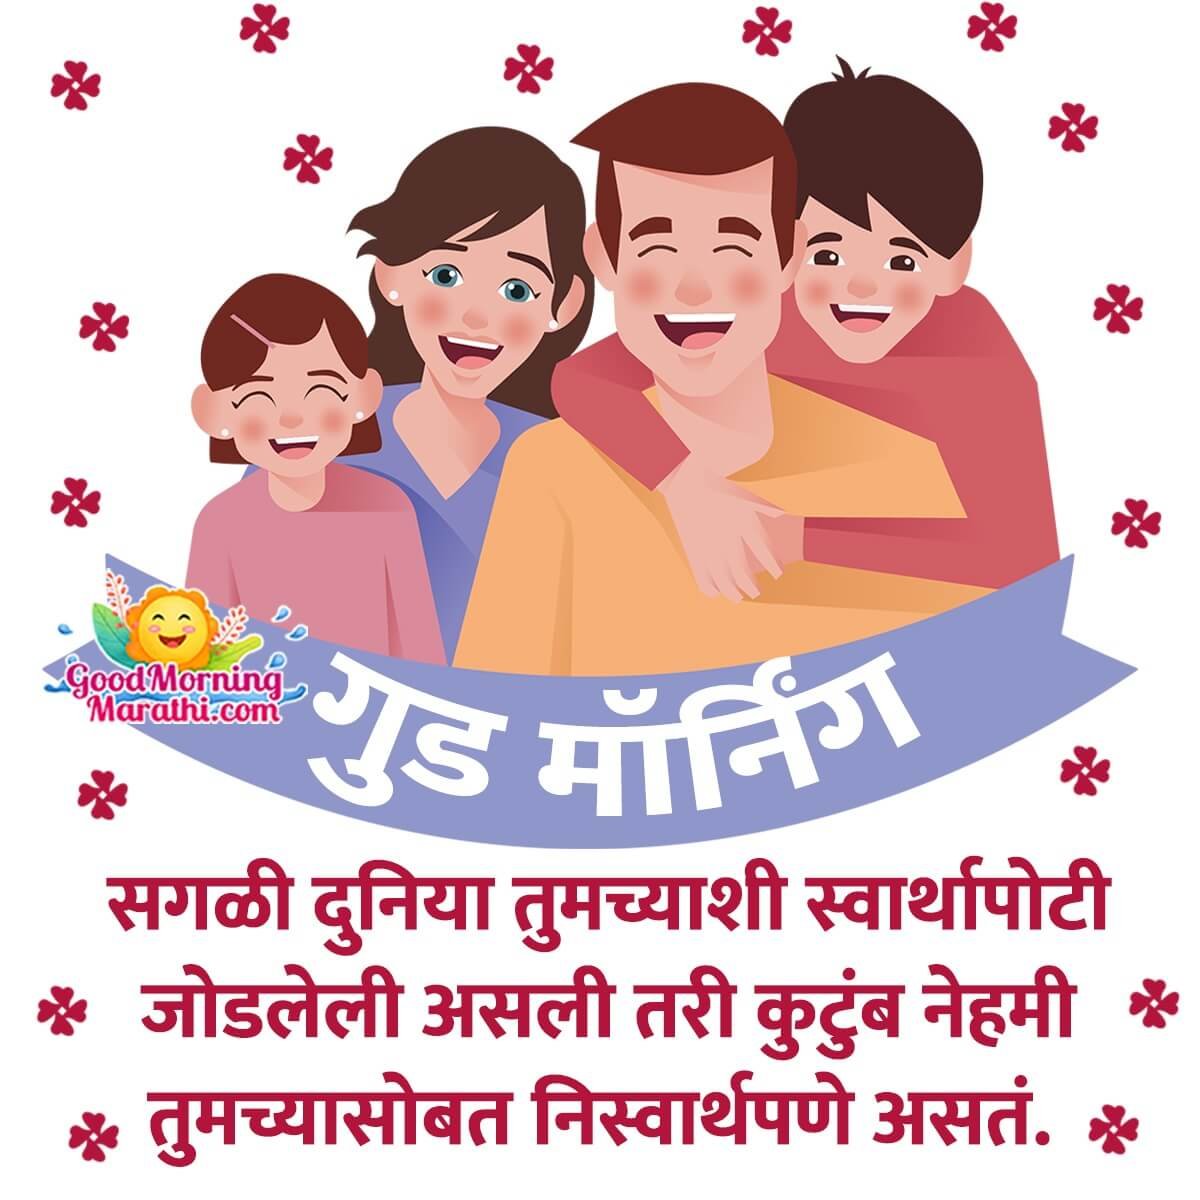 Good Morning Family Quotes in Marathi - Good Morning Wishes ...